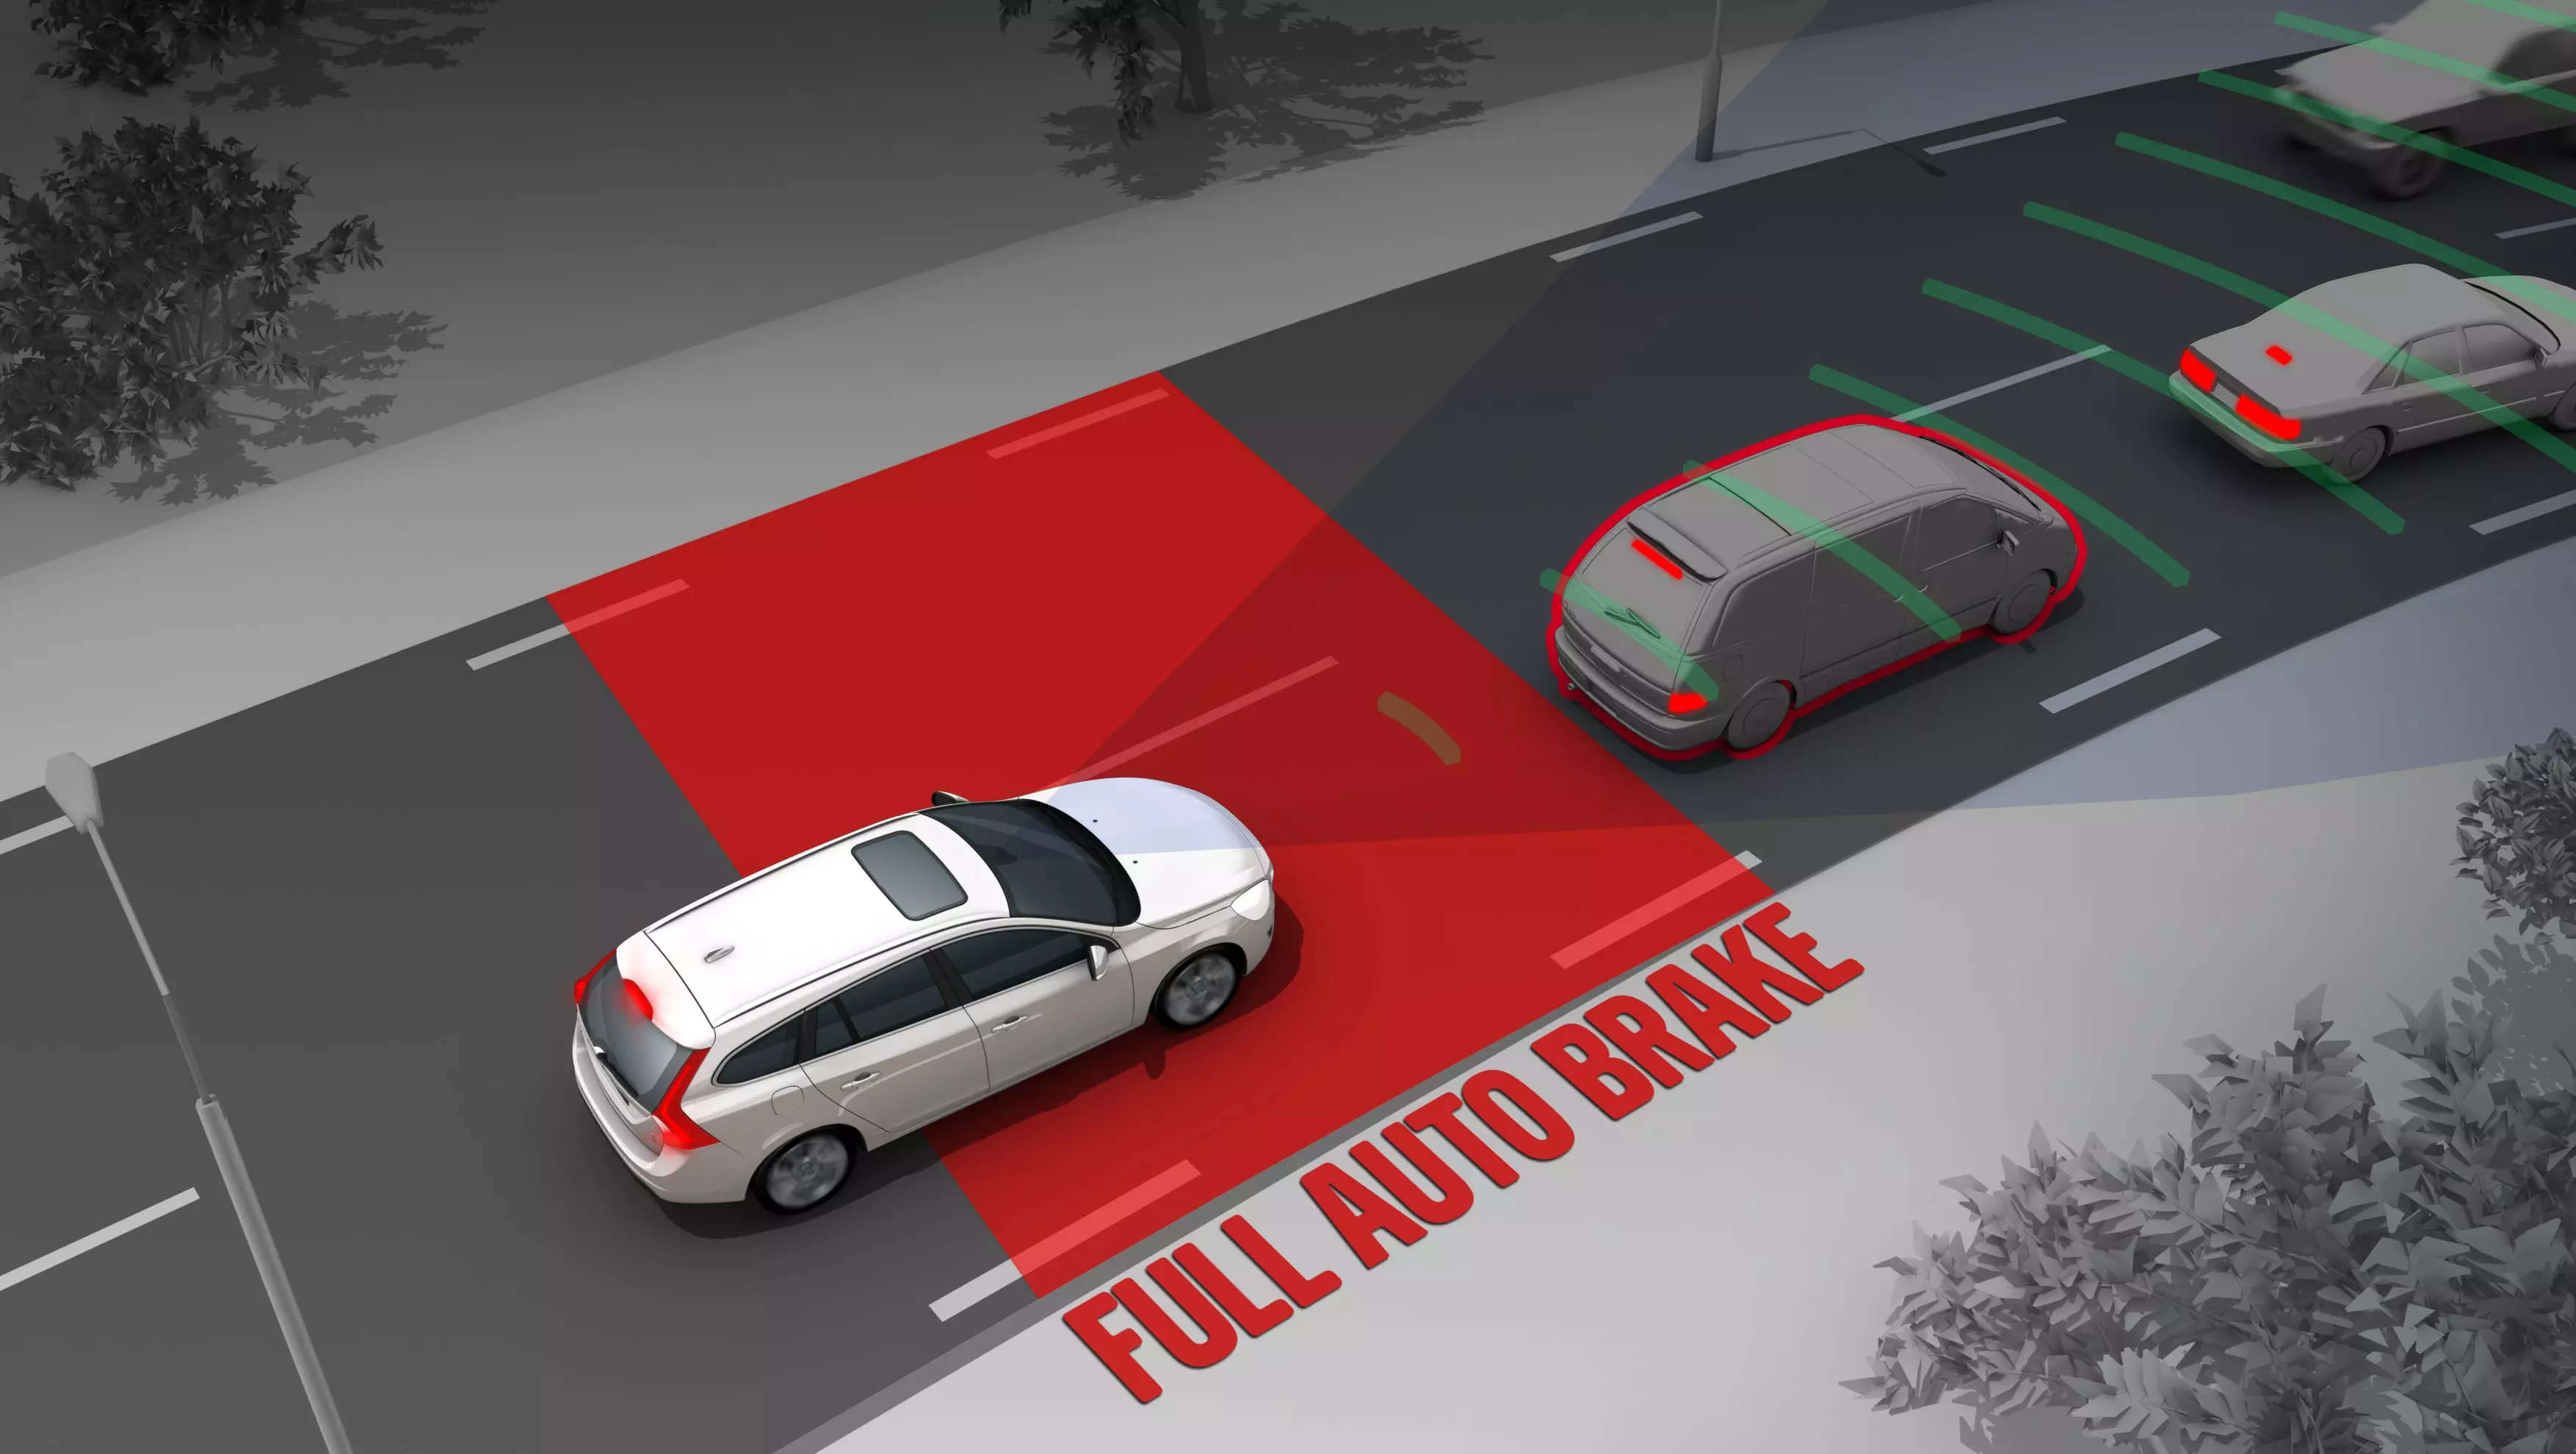 <p>Part of the Advanced Driving Assistance System (ADAS), AEB usually prompts an audio or visual collision warning to the driver and full braking is automatically initiated in case the driver fails to react to the situation.</p>